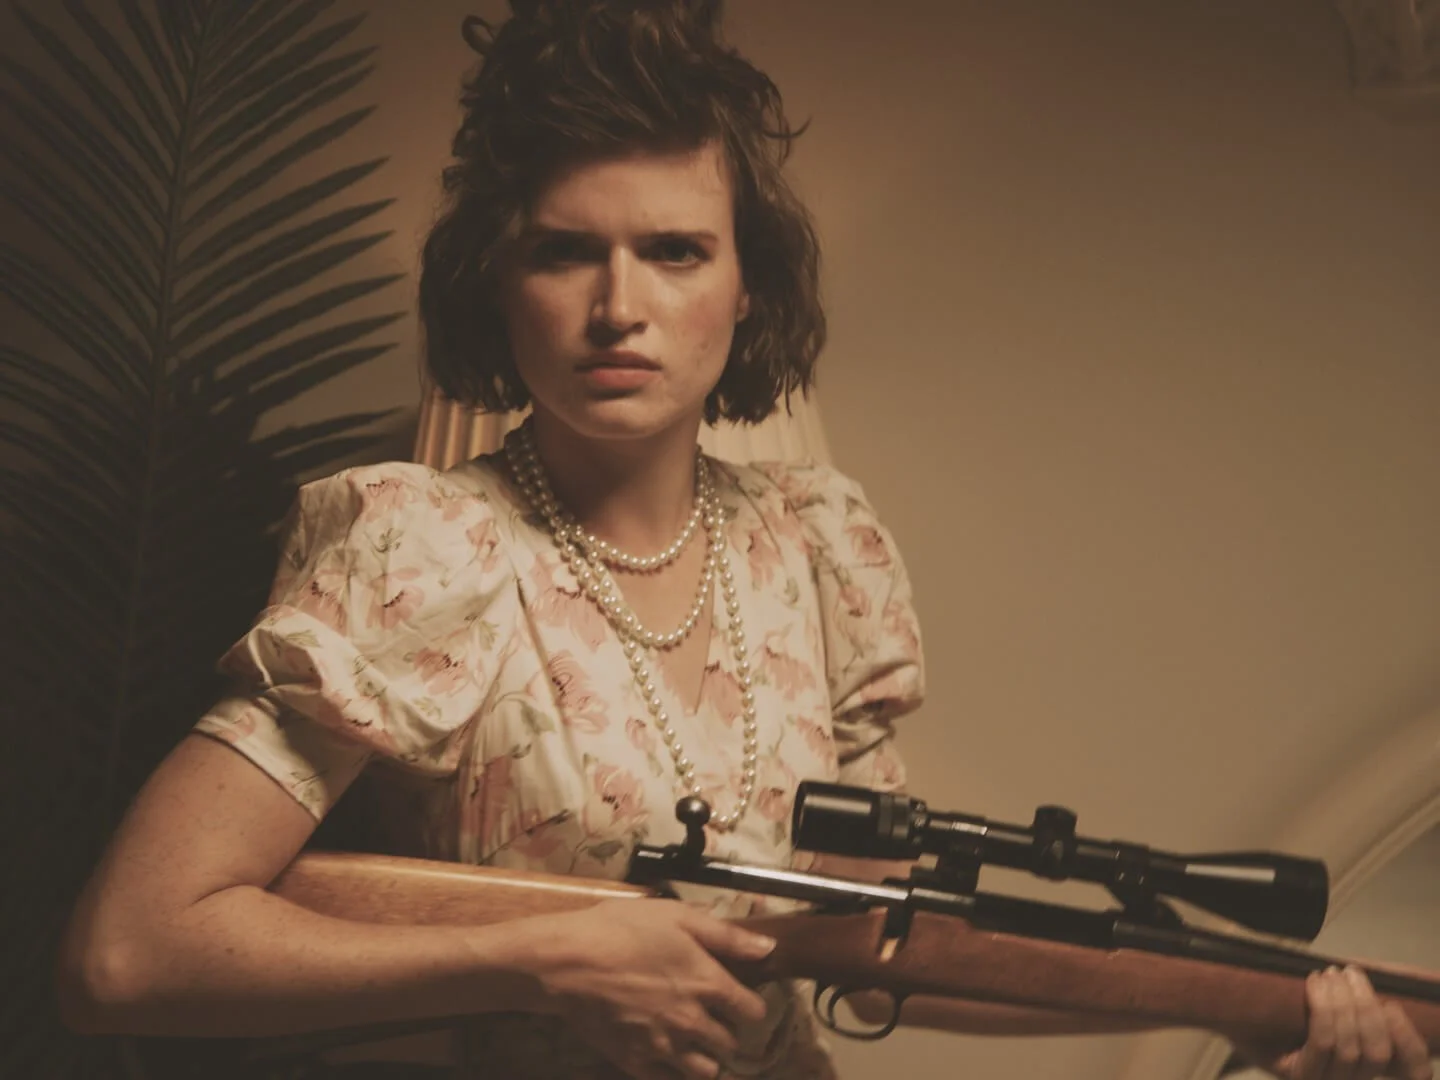 A mad teenage girl wearing pearls and a flowery dress looks directly into the camera. She's holding a hunting rifle and she's eager to use it.